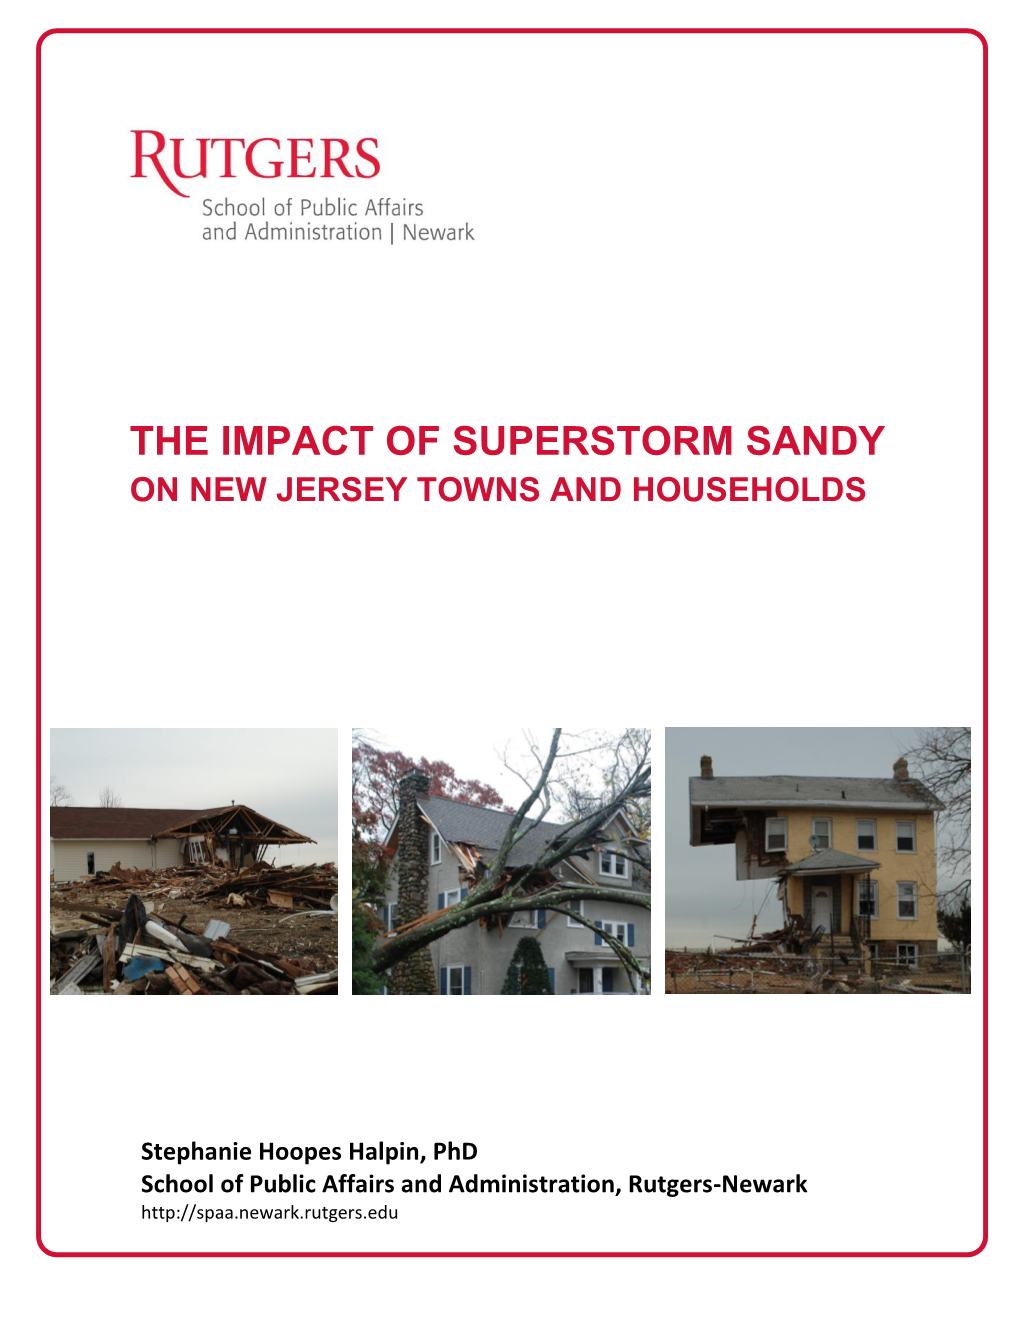 The Impact of Superstorm Sandy on New Jersey Towns and Households